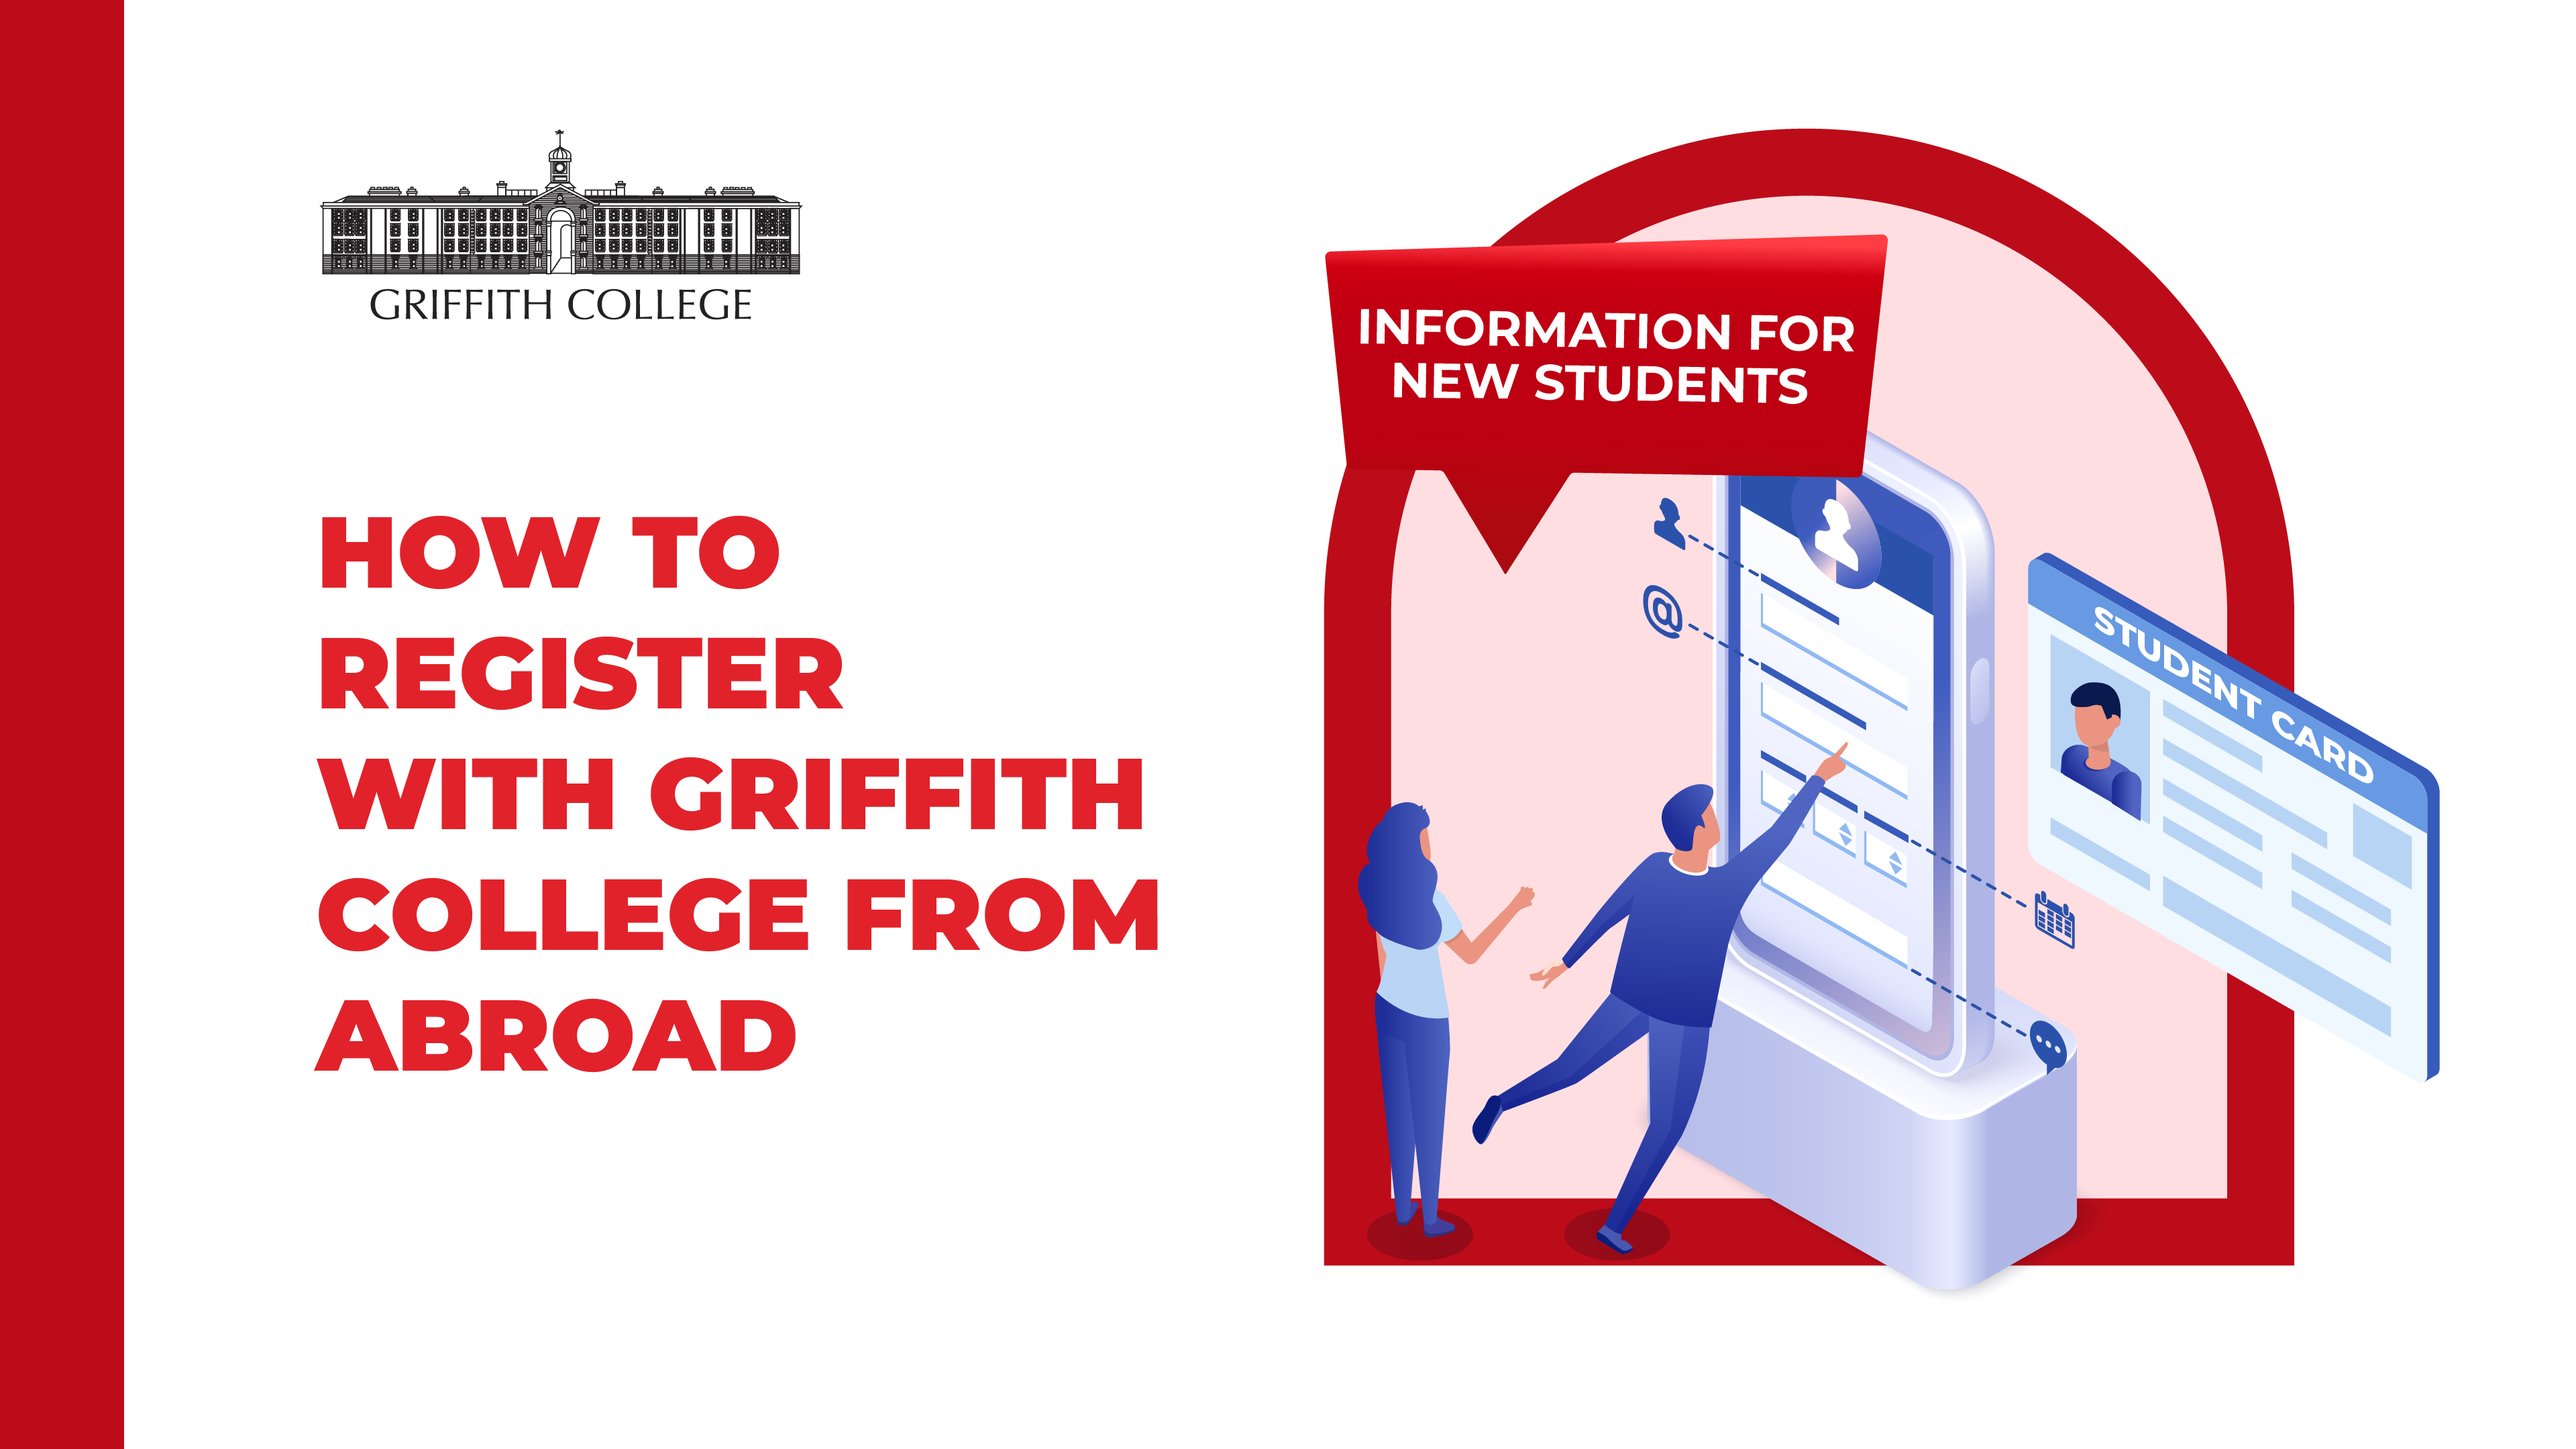 How to register with Griffith College